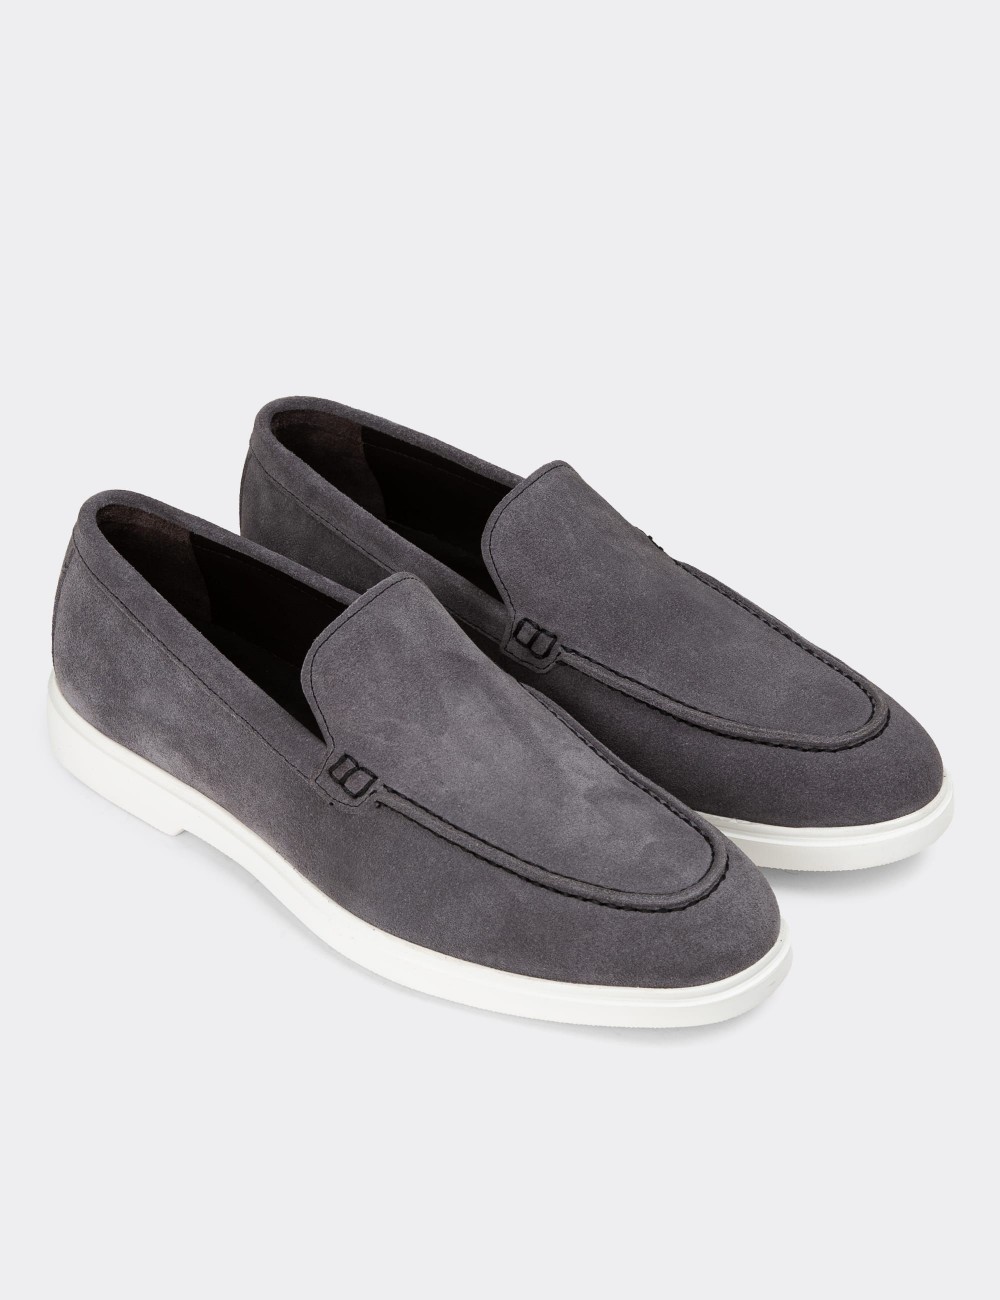 Gray Suede Leather Loafers - 01957MGRIE01